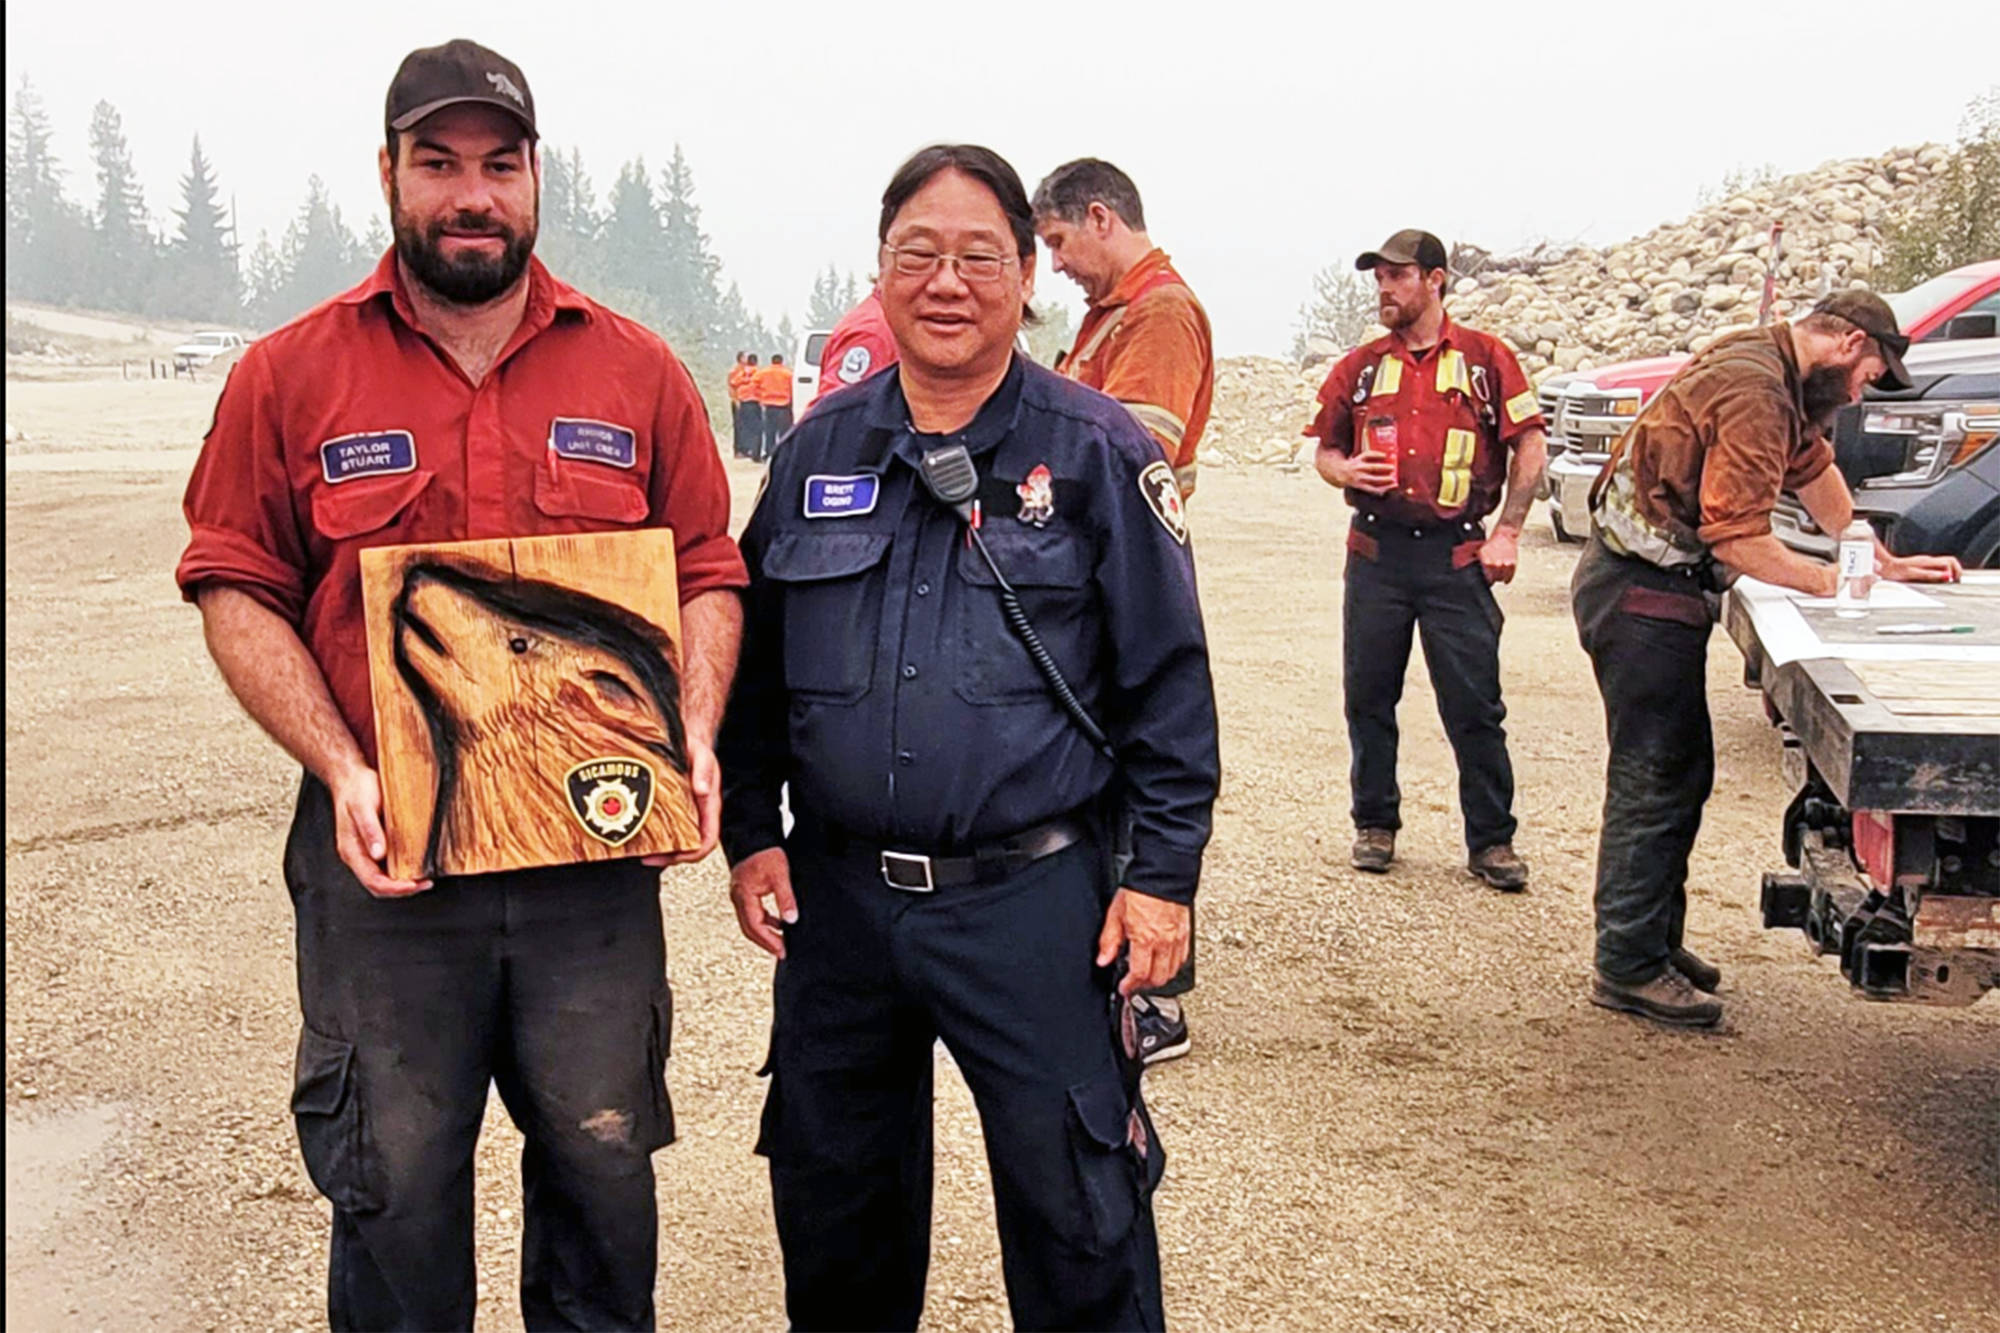 Sicamous Fire Chief Brett Ogino expresses his gratitude to Taylor Stuart and the Rhinos wildfire crew, which had been working on the Two Mile Road wildfire south of Sicamous. (Sicamous Fire Department photo)